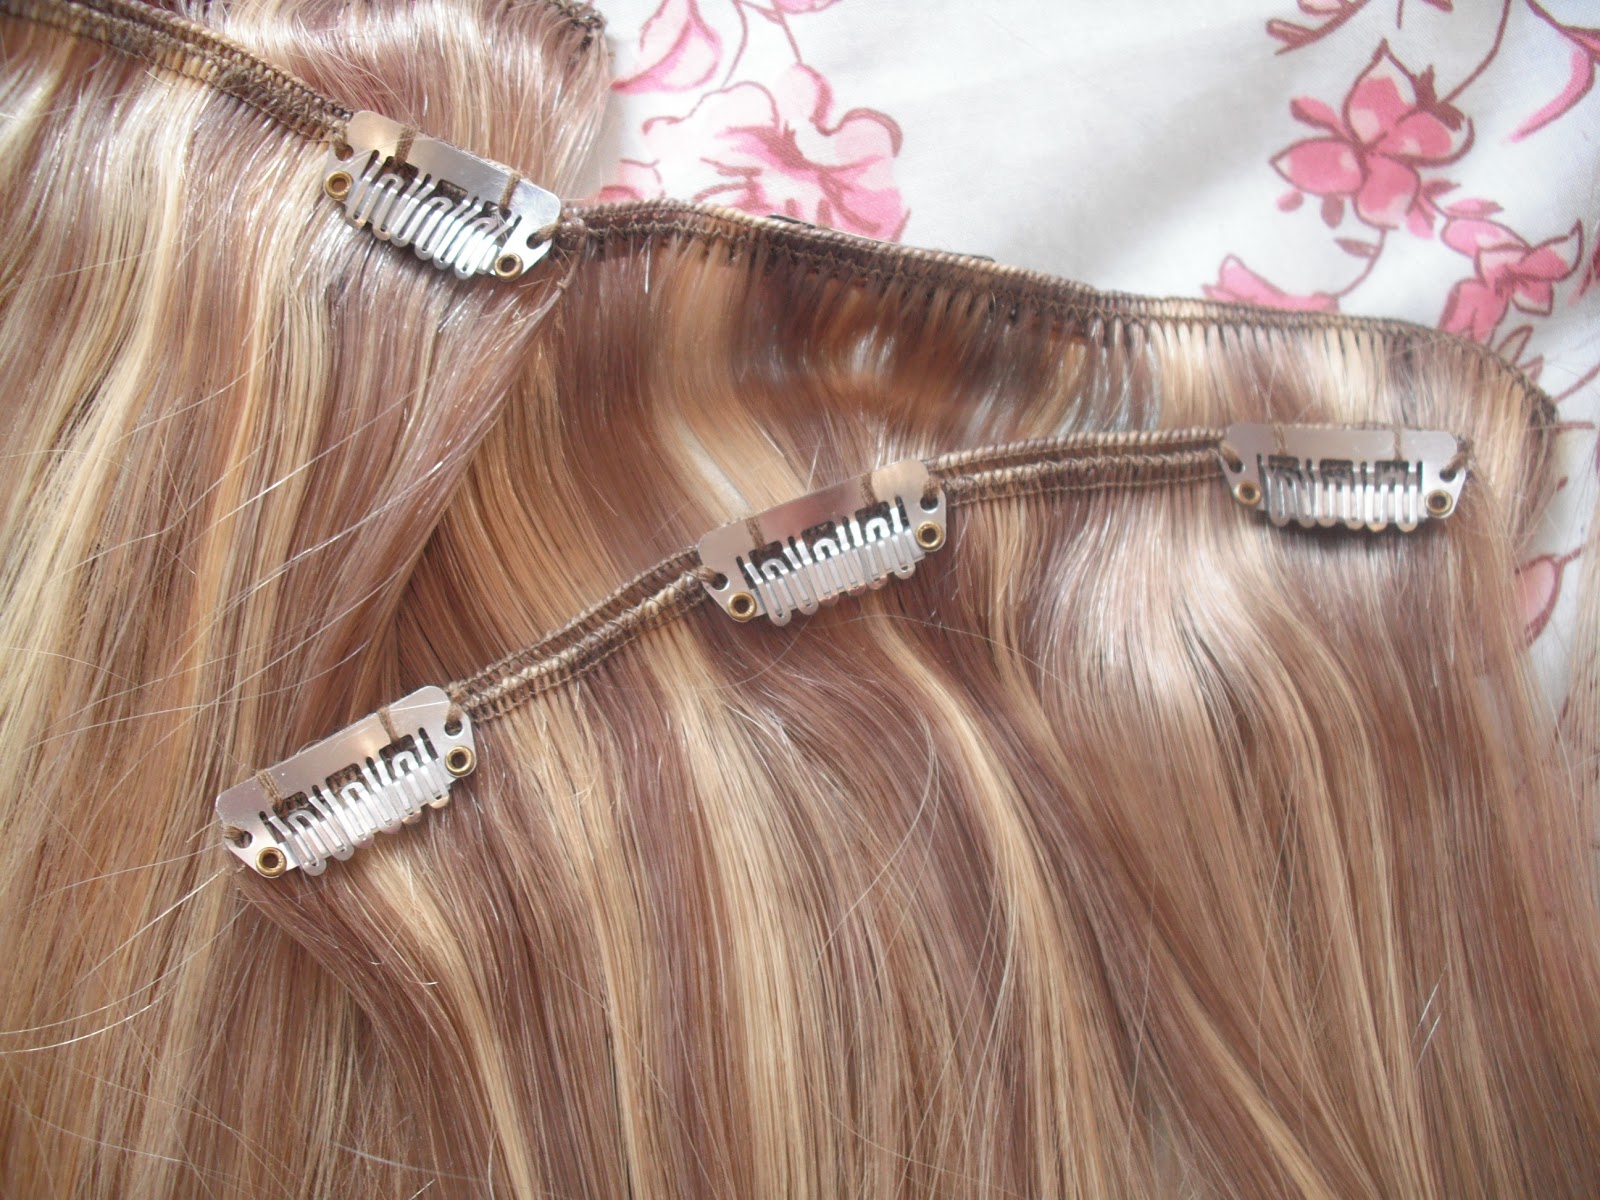 8. Blue Clip in Hair Extensions - Amazon.com.au - wide 9